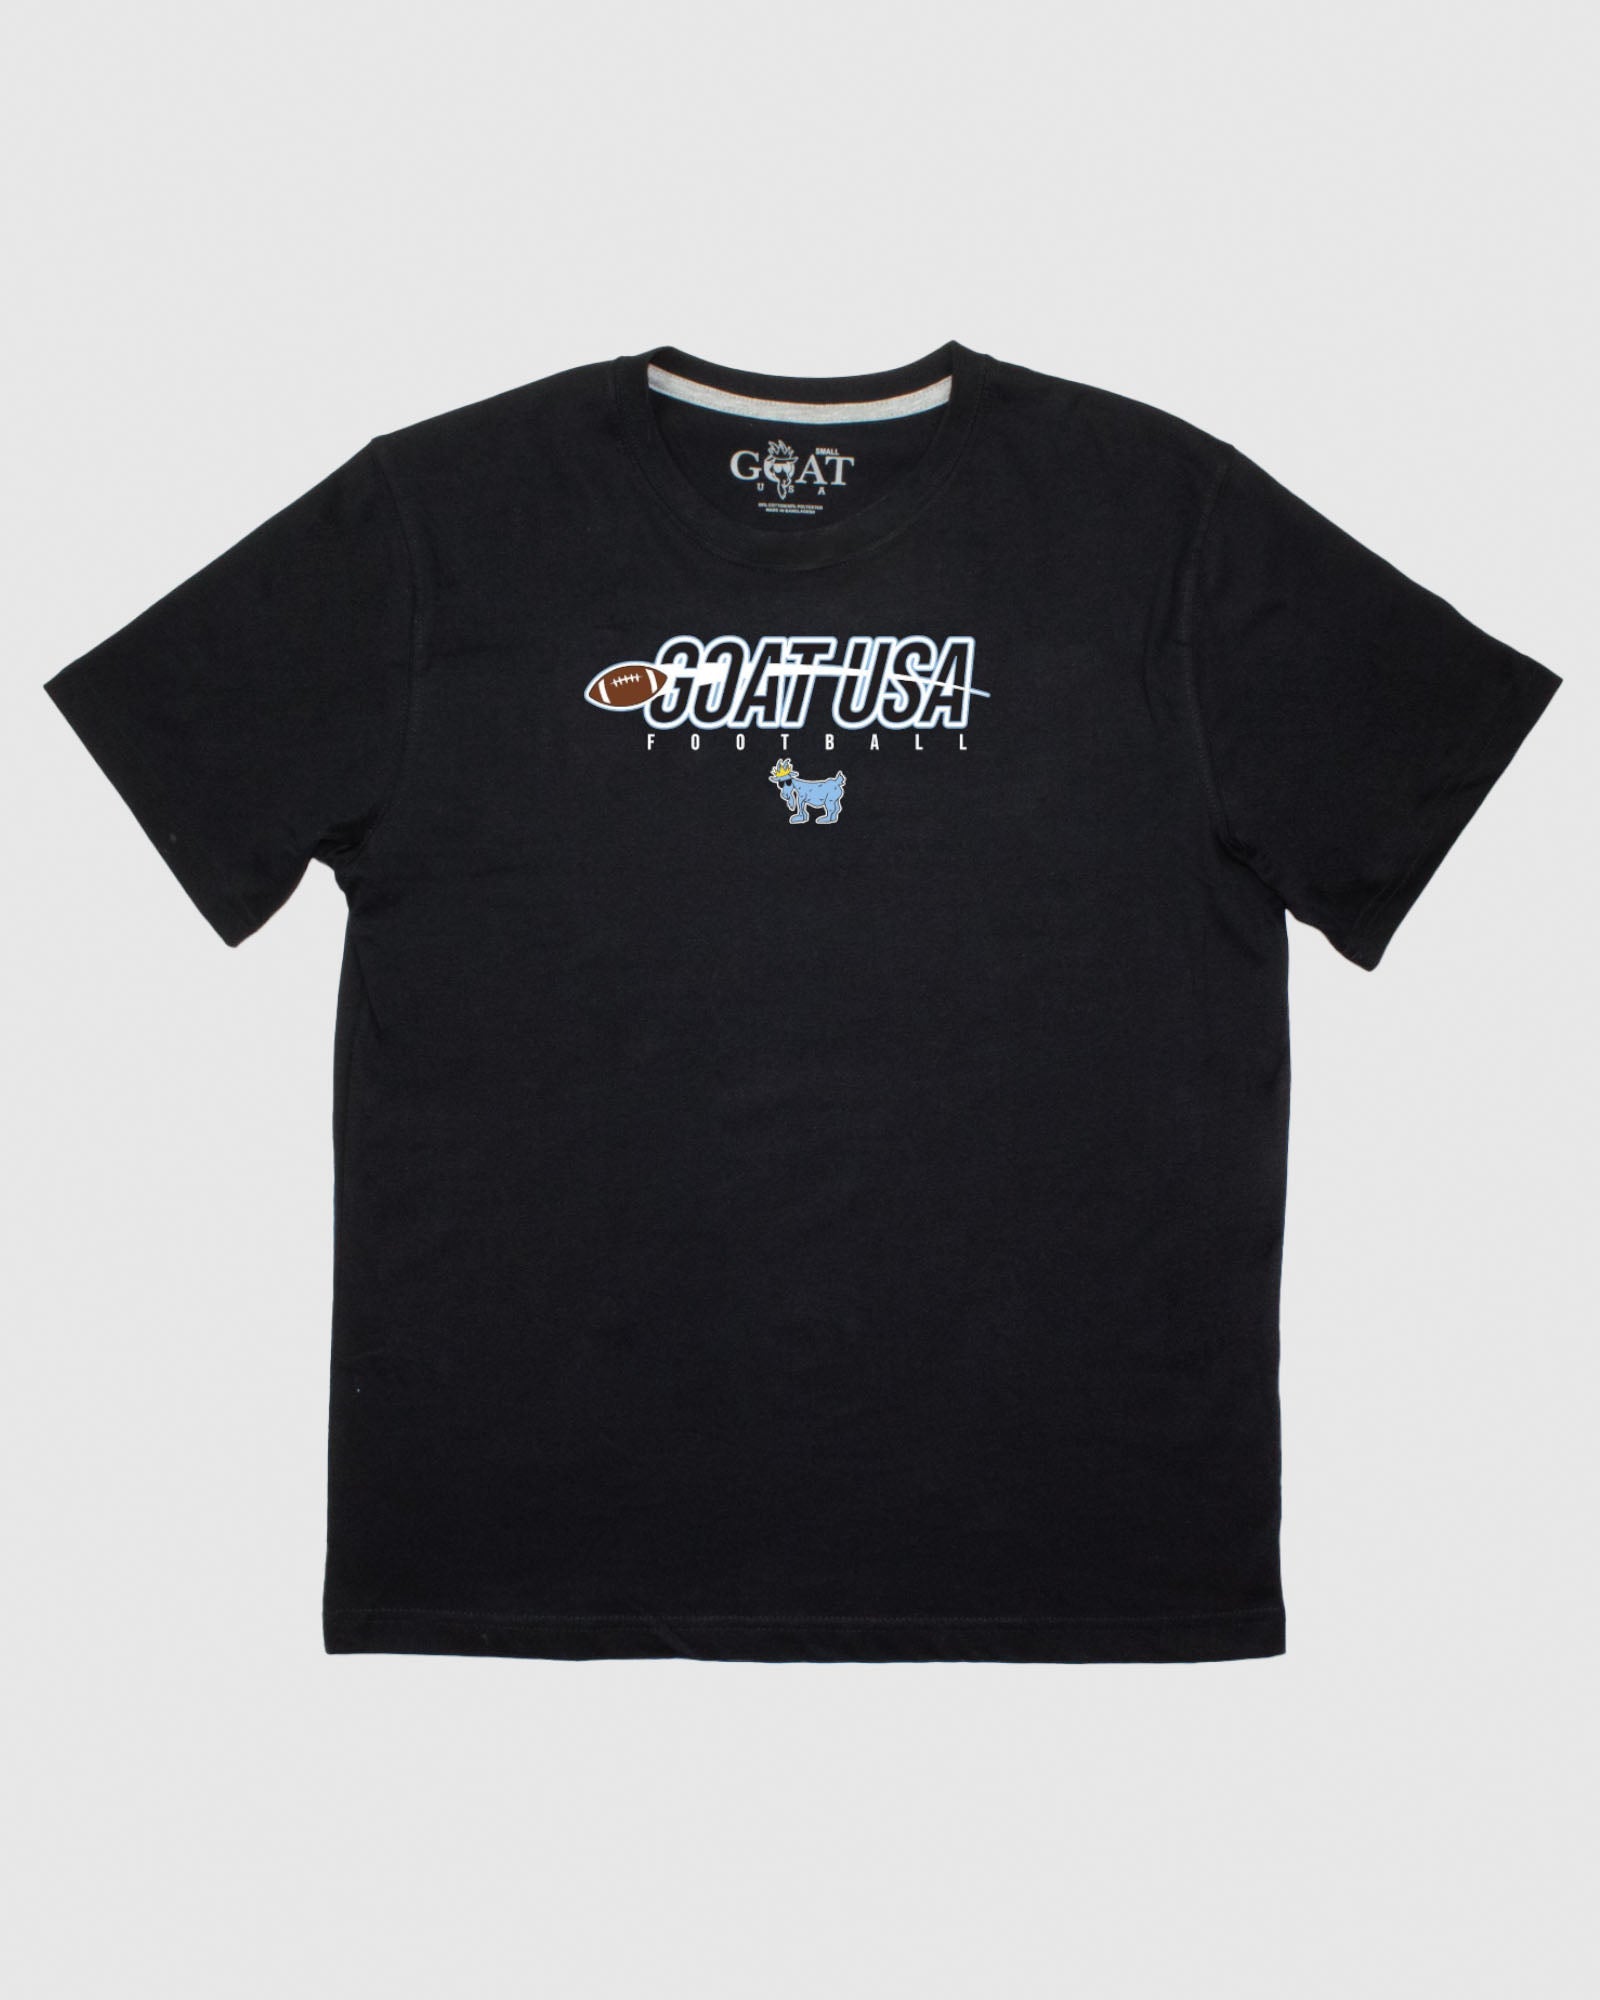 Goat USA Youth Showtime Football T-Shirt Apparel Goat USA Black Youth Small 